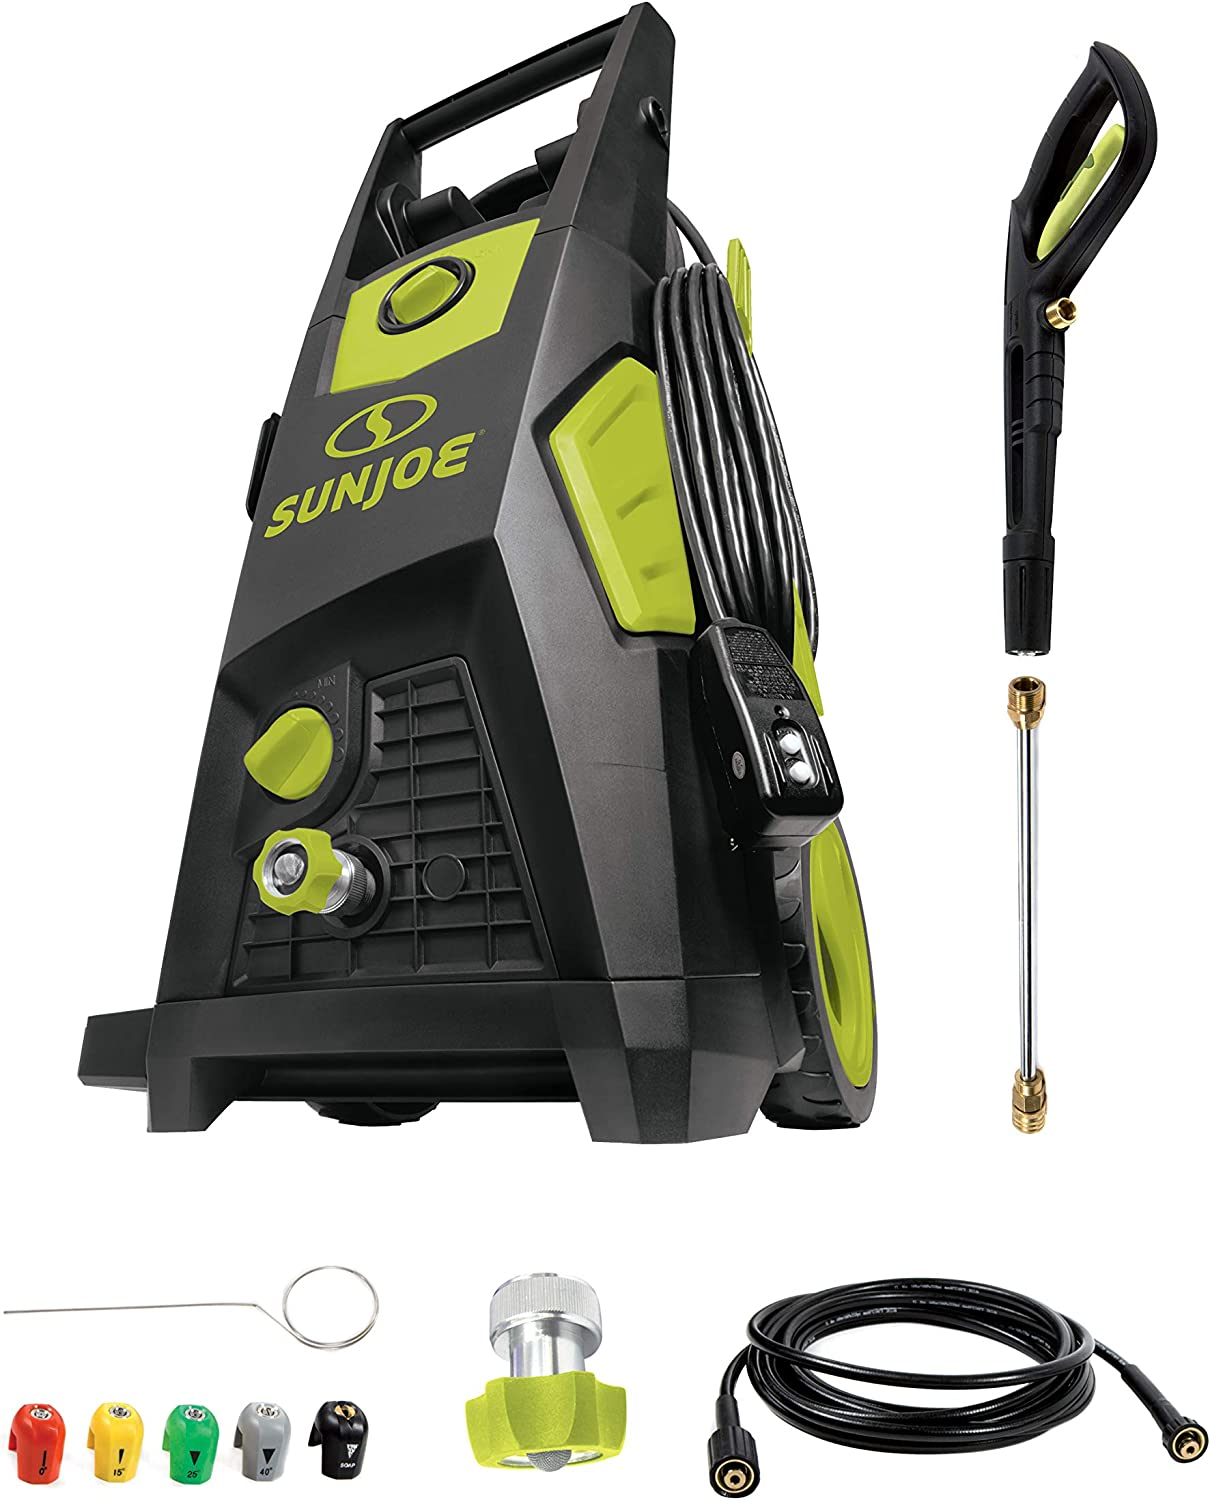 Sun Joe SPX3500 2300 Max Psi 1.48 Gpm Brushless Induction Electric Pressure Washer w/Brass Hose Connector $137.51